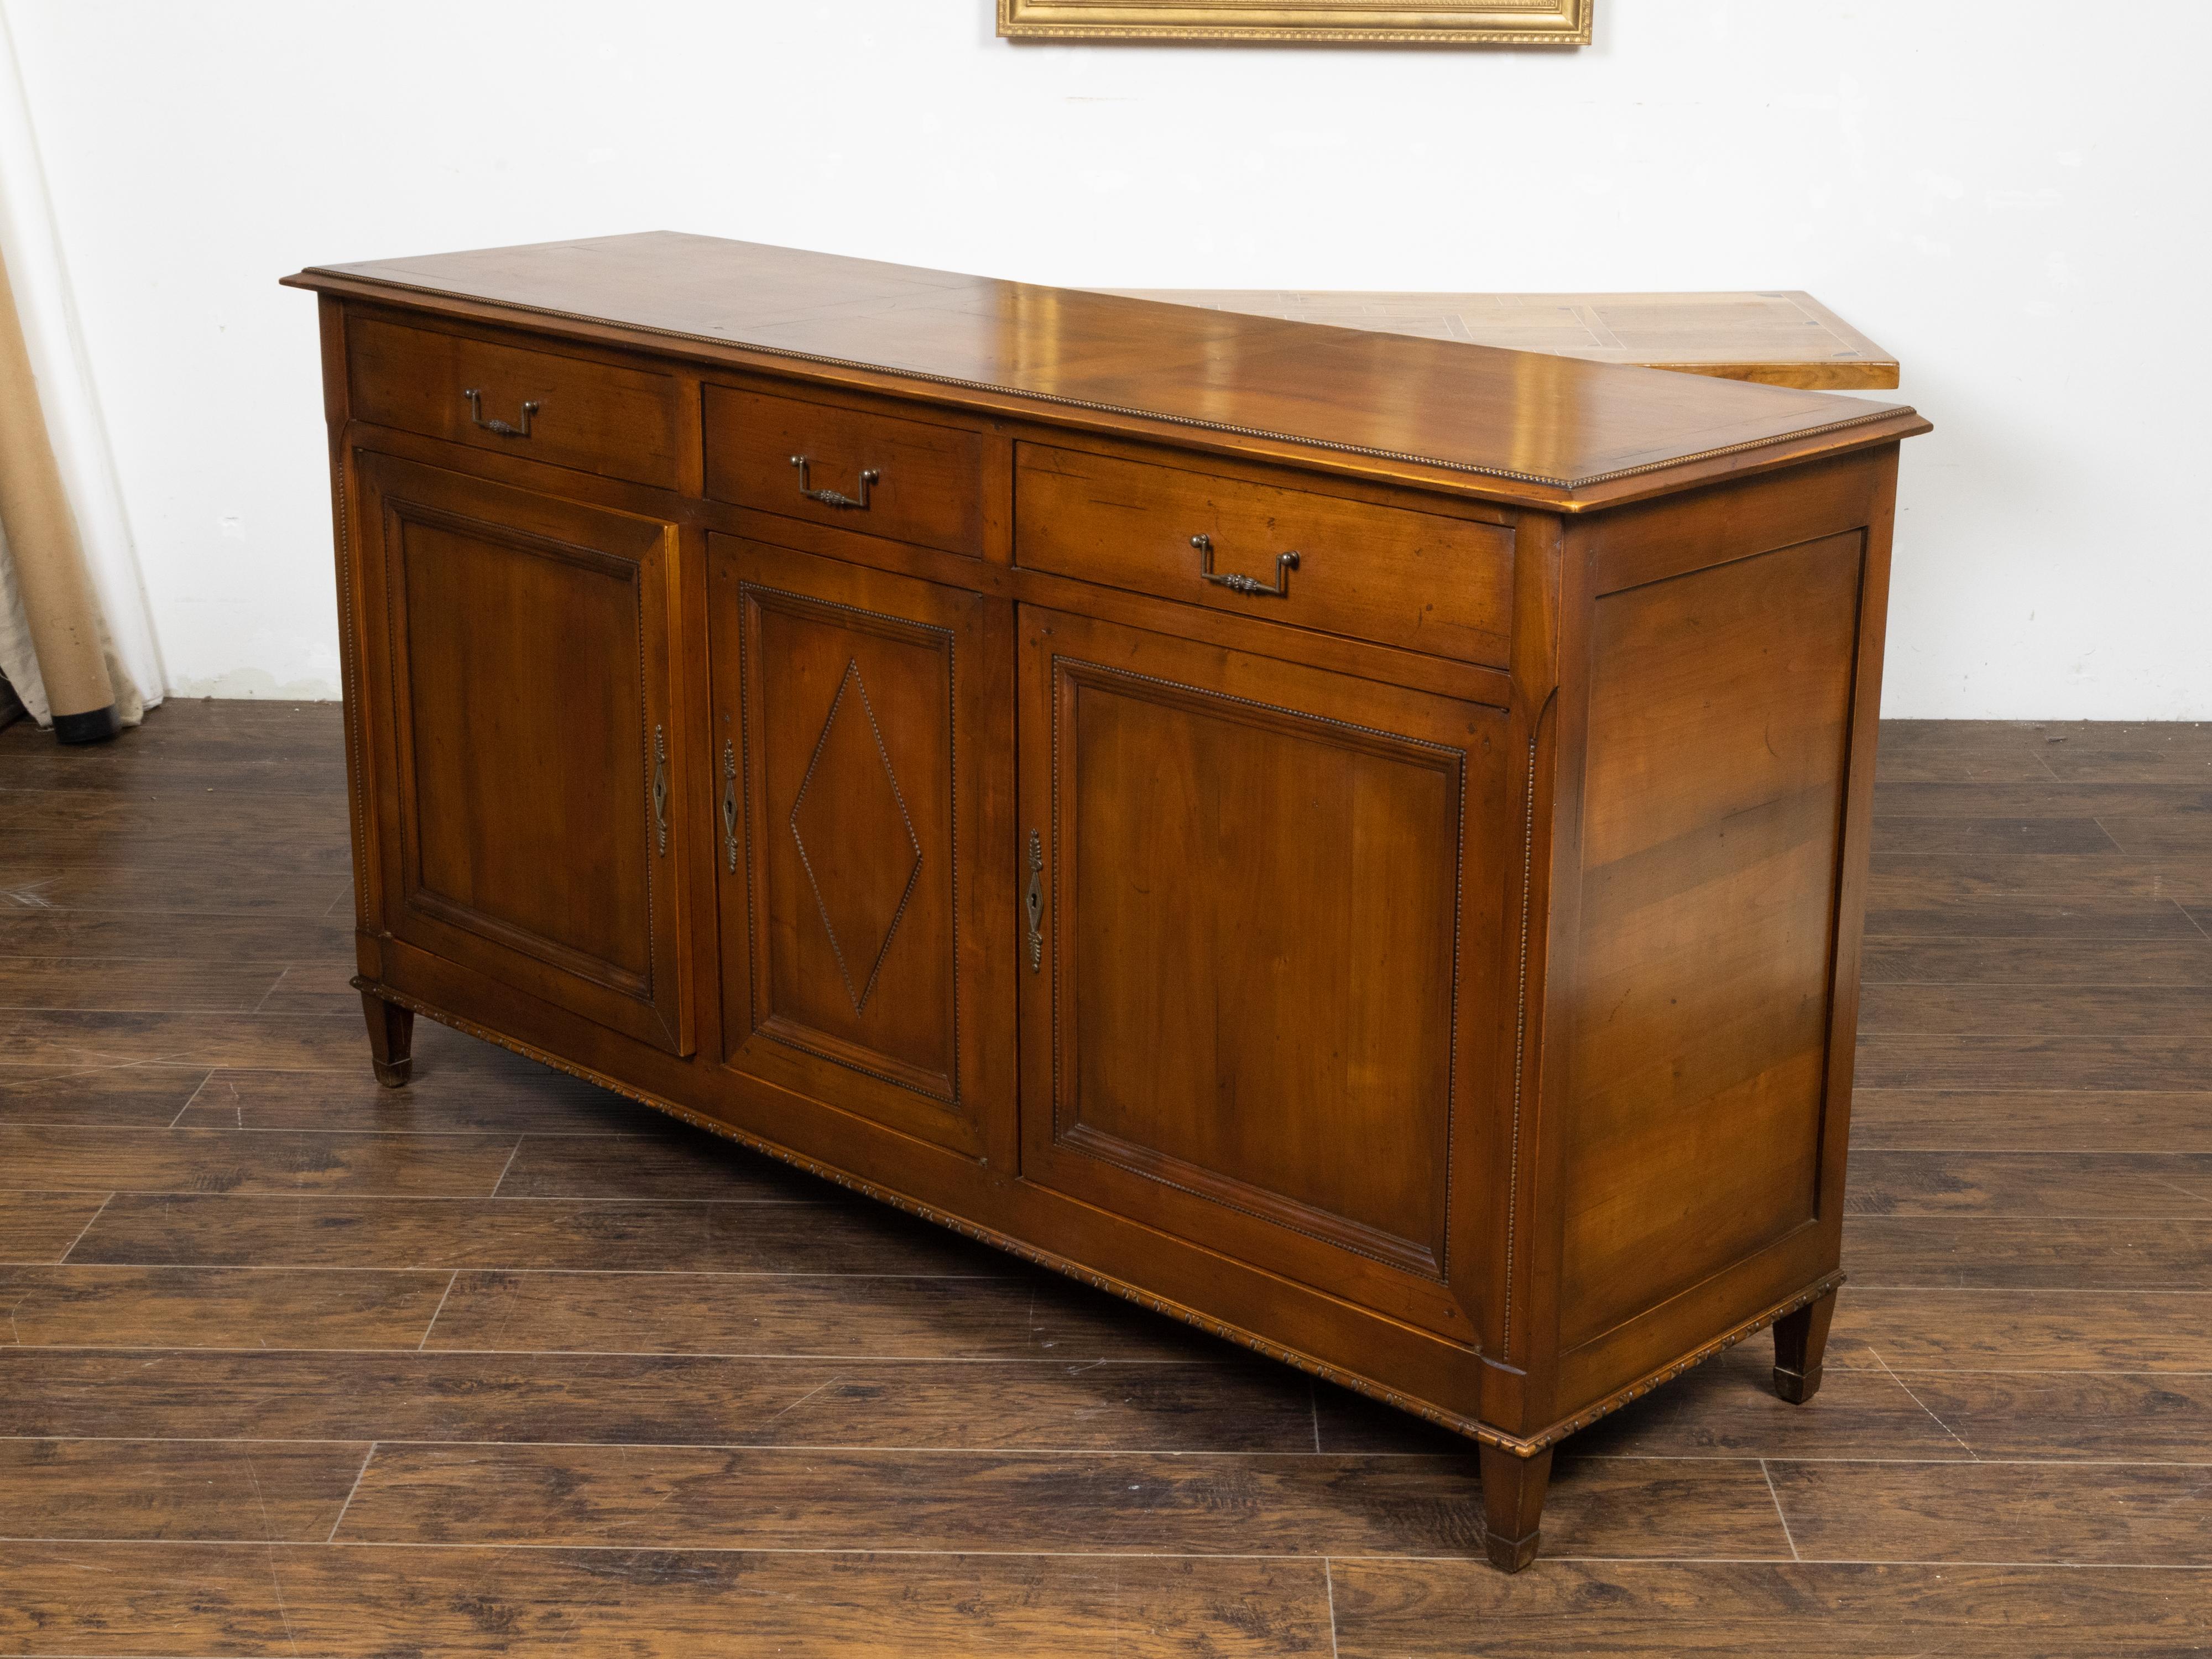 French 1940s Walnut Enfilade with Drawers, Doors, Carved Beads and Diamond Motif In Good Condition For Sale In Atlanta, GA